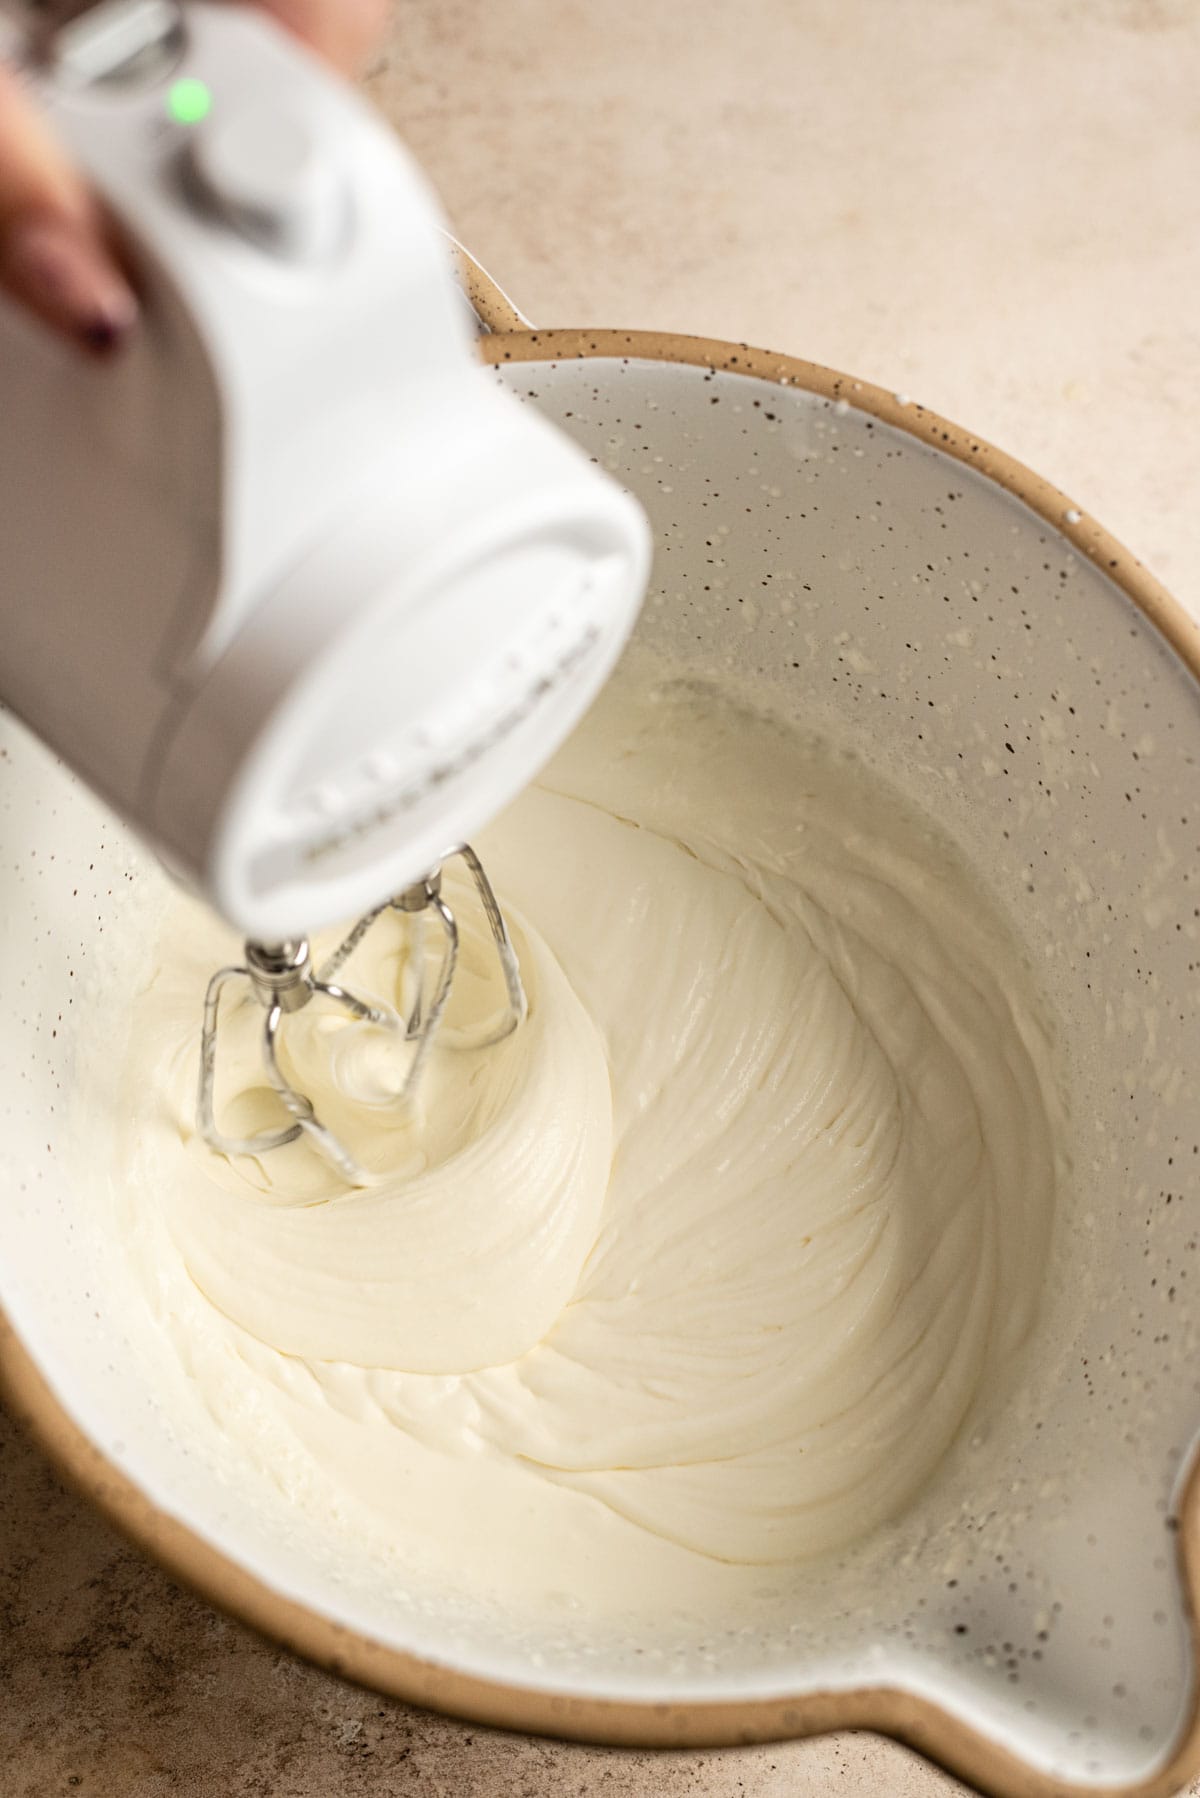 A mixer starting to whip the cream in a bowl.